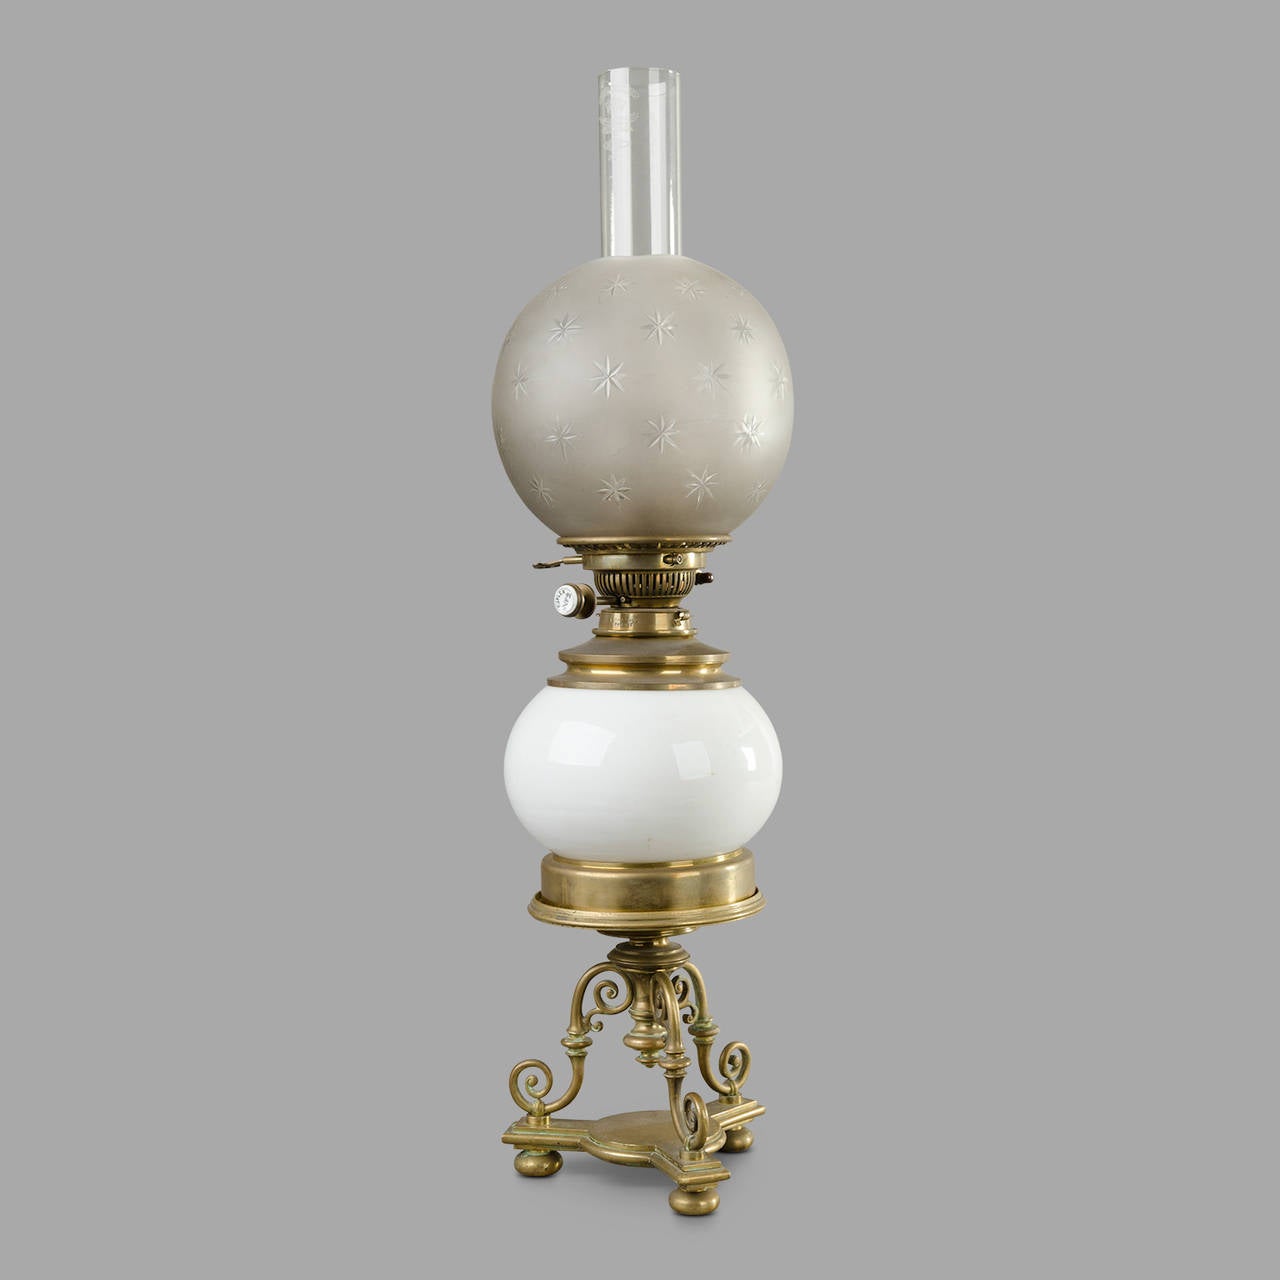 Large late 19th century tripod petrol table lamp. White ceramic reservoir on a brass base. Ground glass with engraved stars.

'Système Duplex n°2.'

Lamp total height: 70cm.
Globe diameter: 19 cm.

In petrol working order but it can be wired